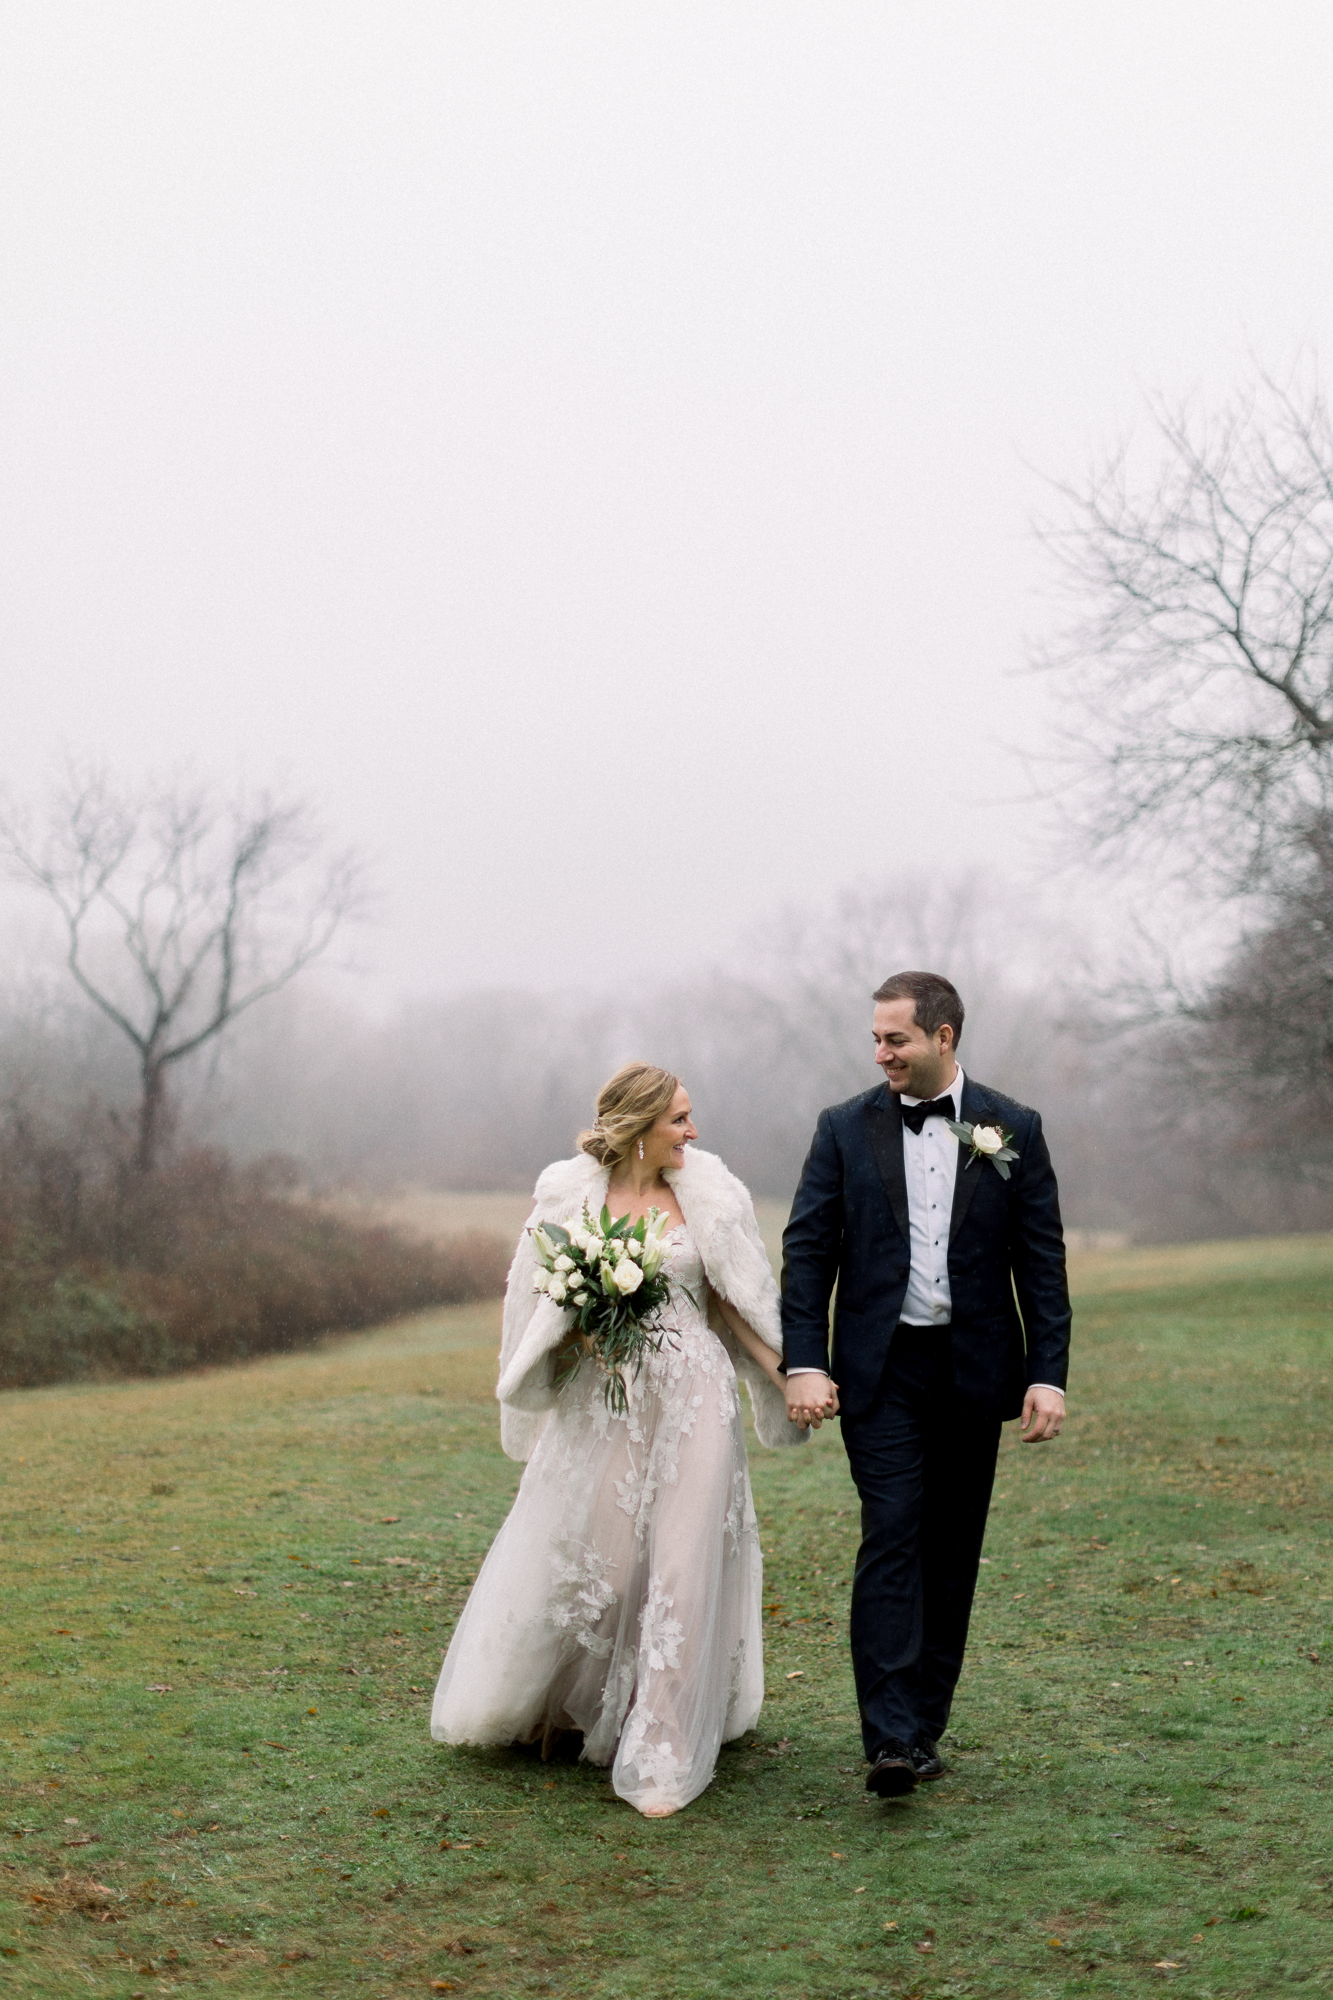 Beautiful Elopement Photography in NYC